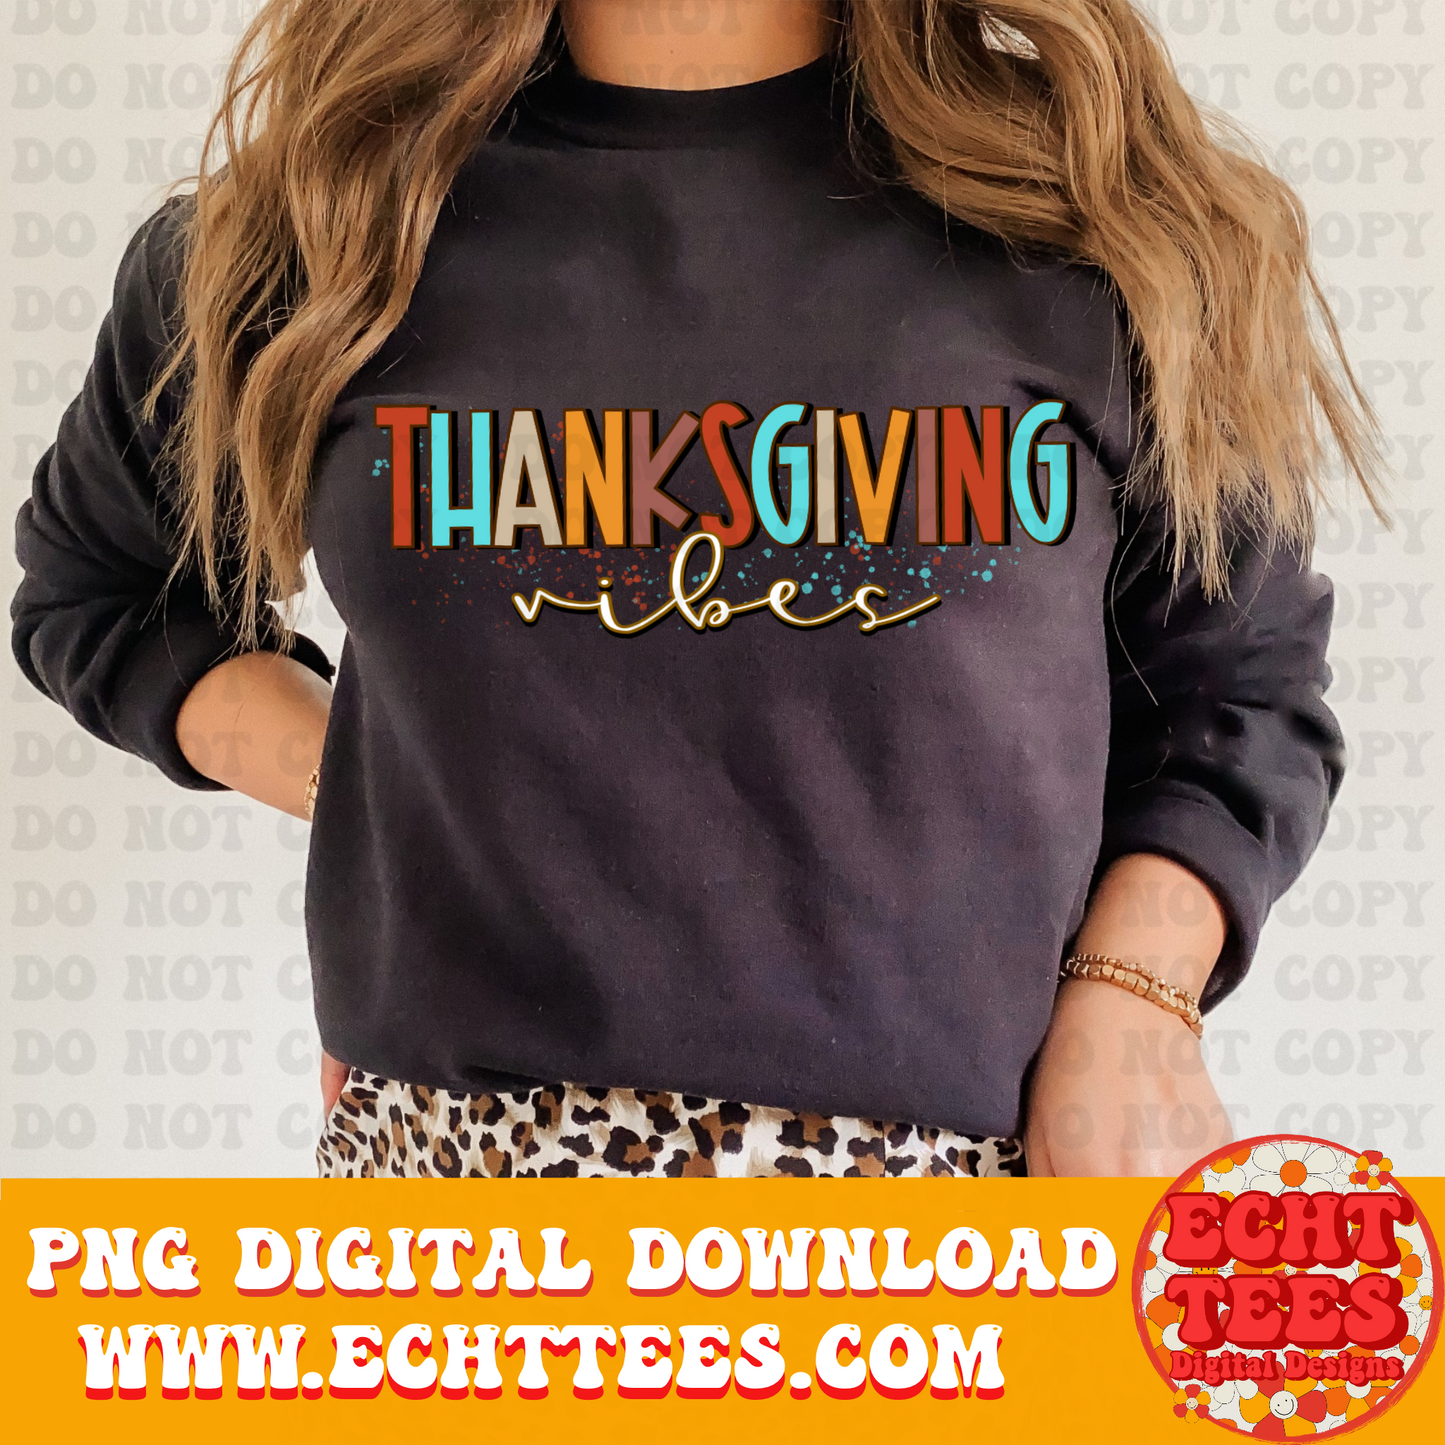 Thanksgiving Vibes PNG Digital Download